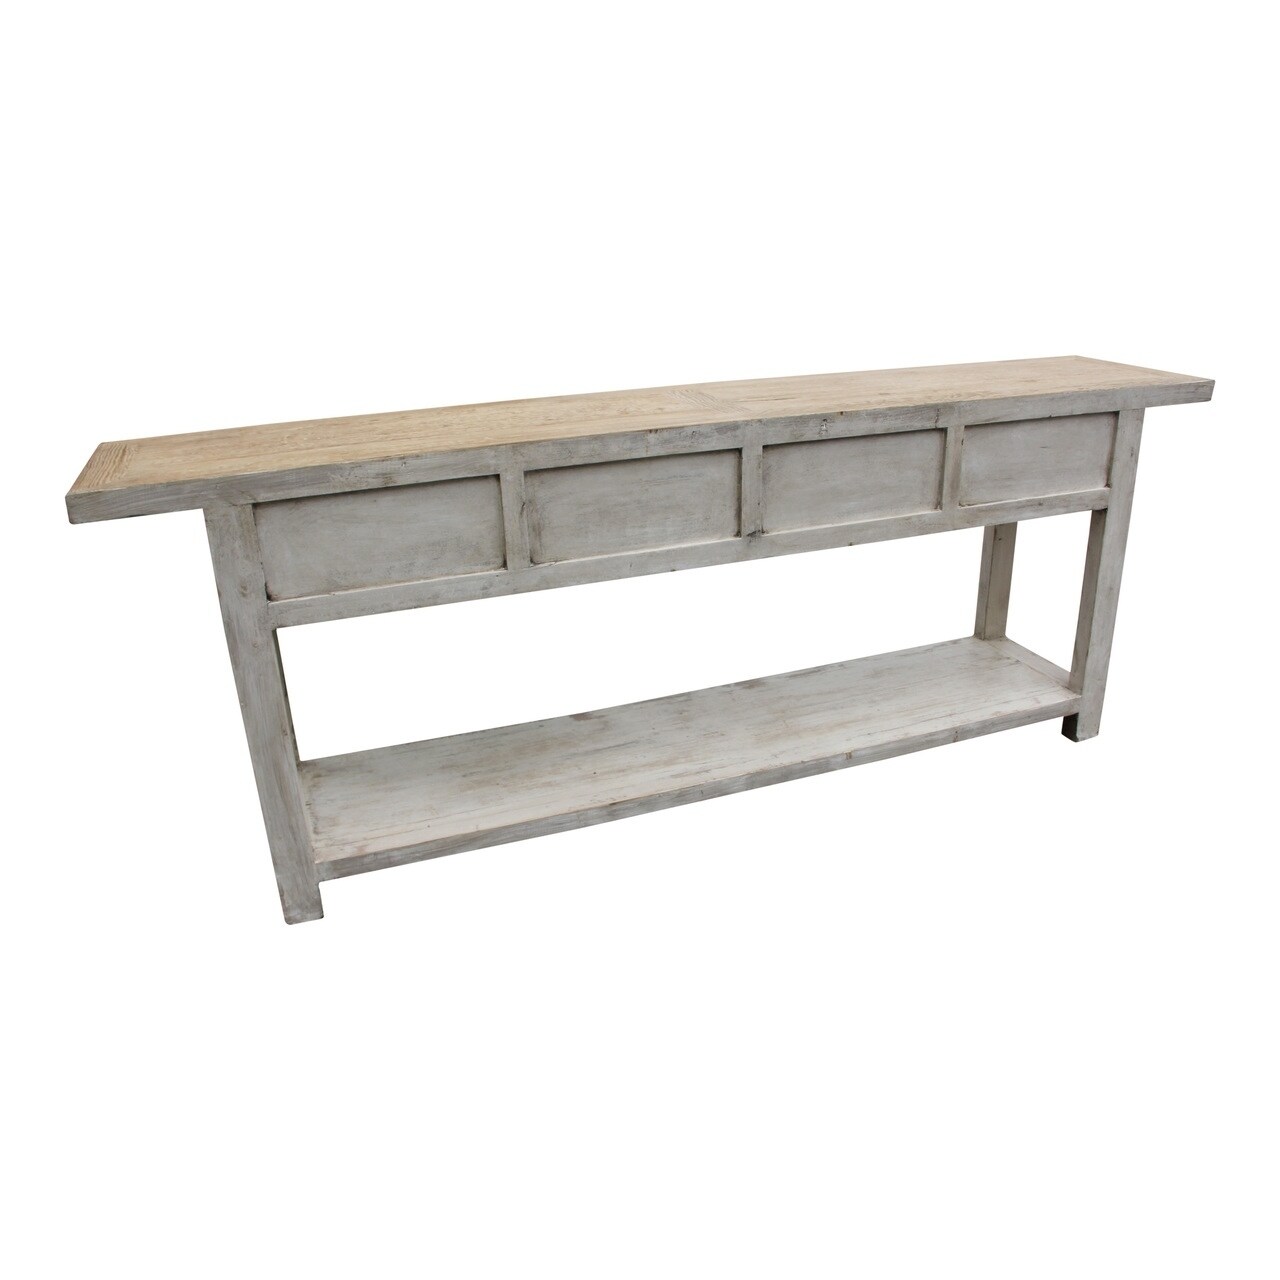 8 foot long console table